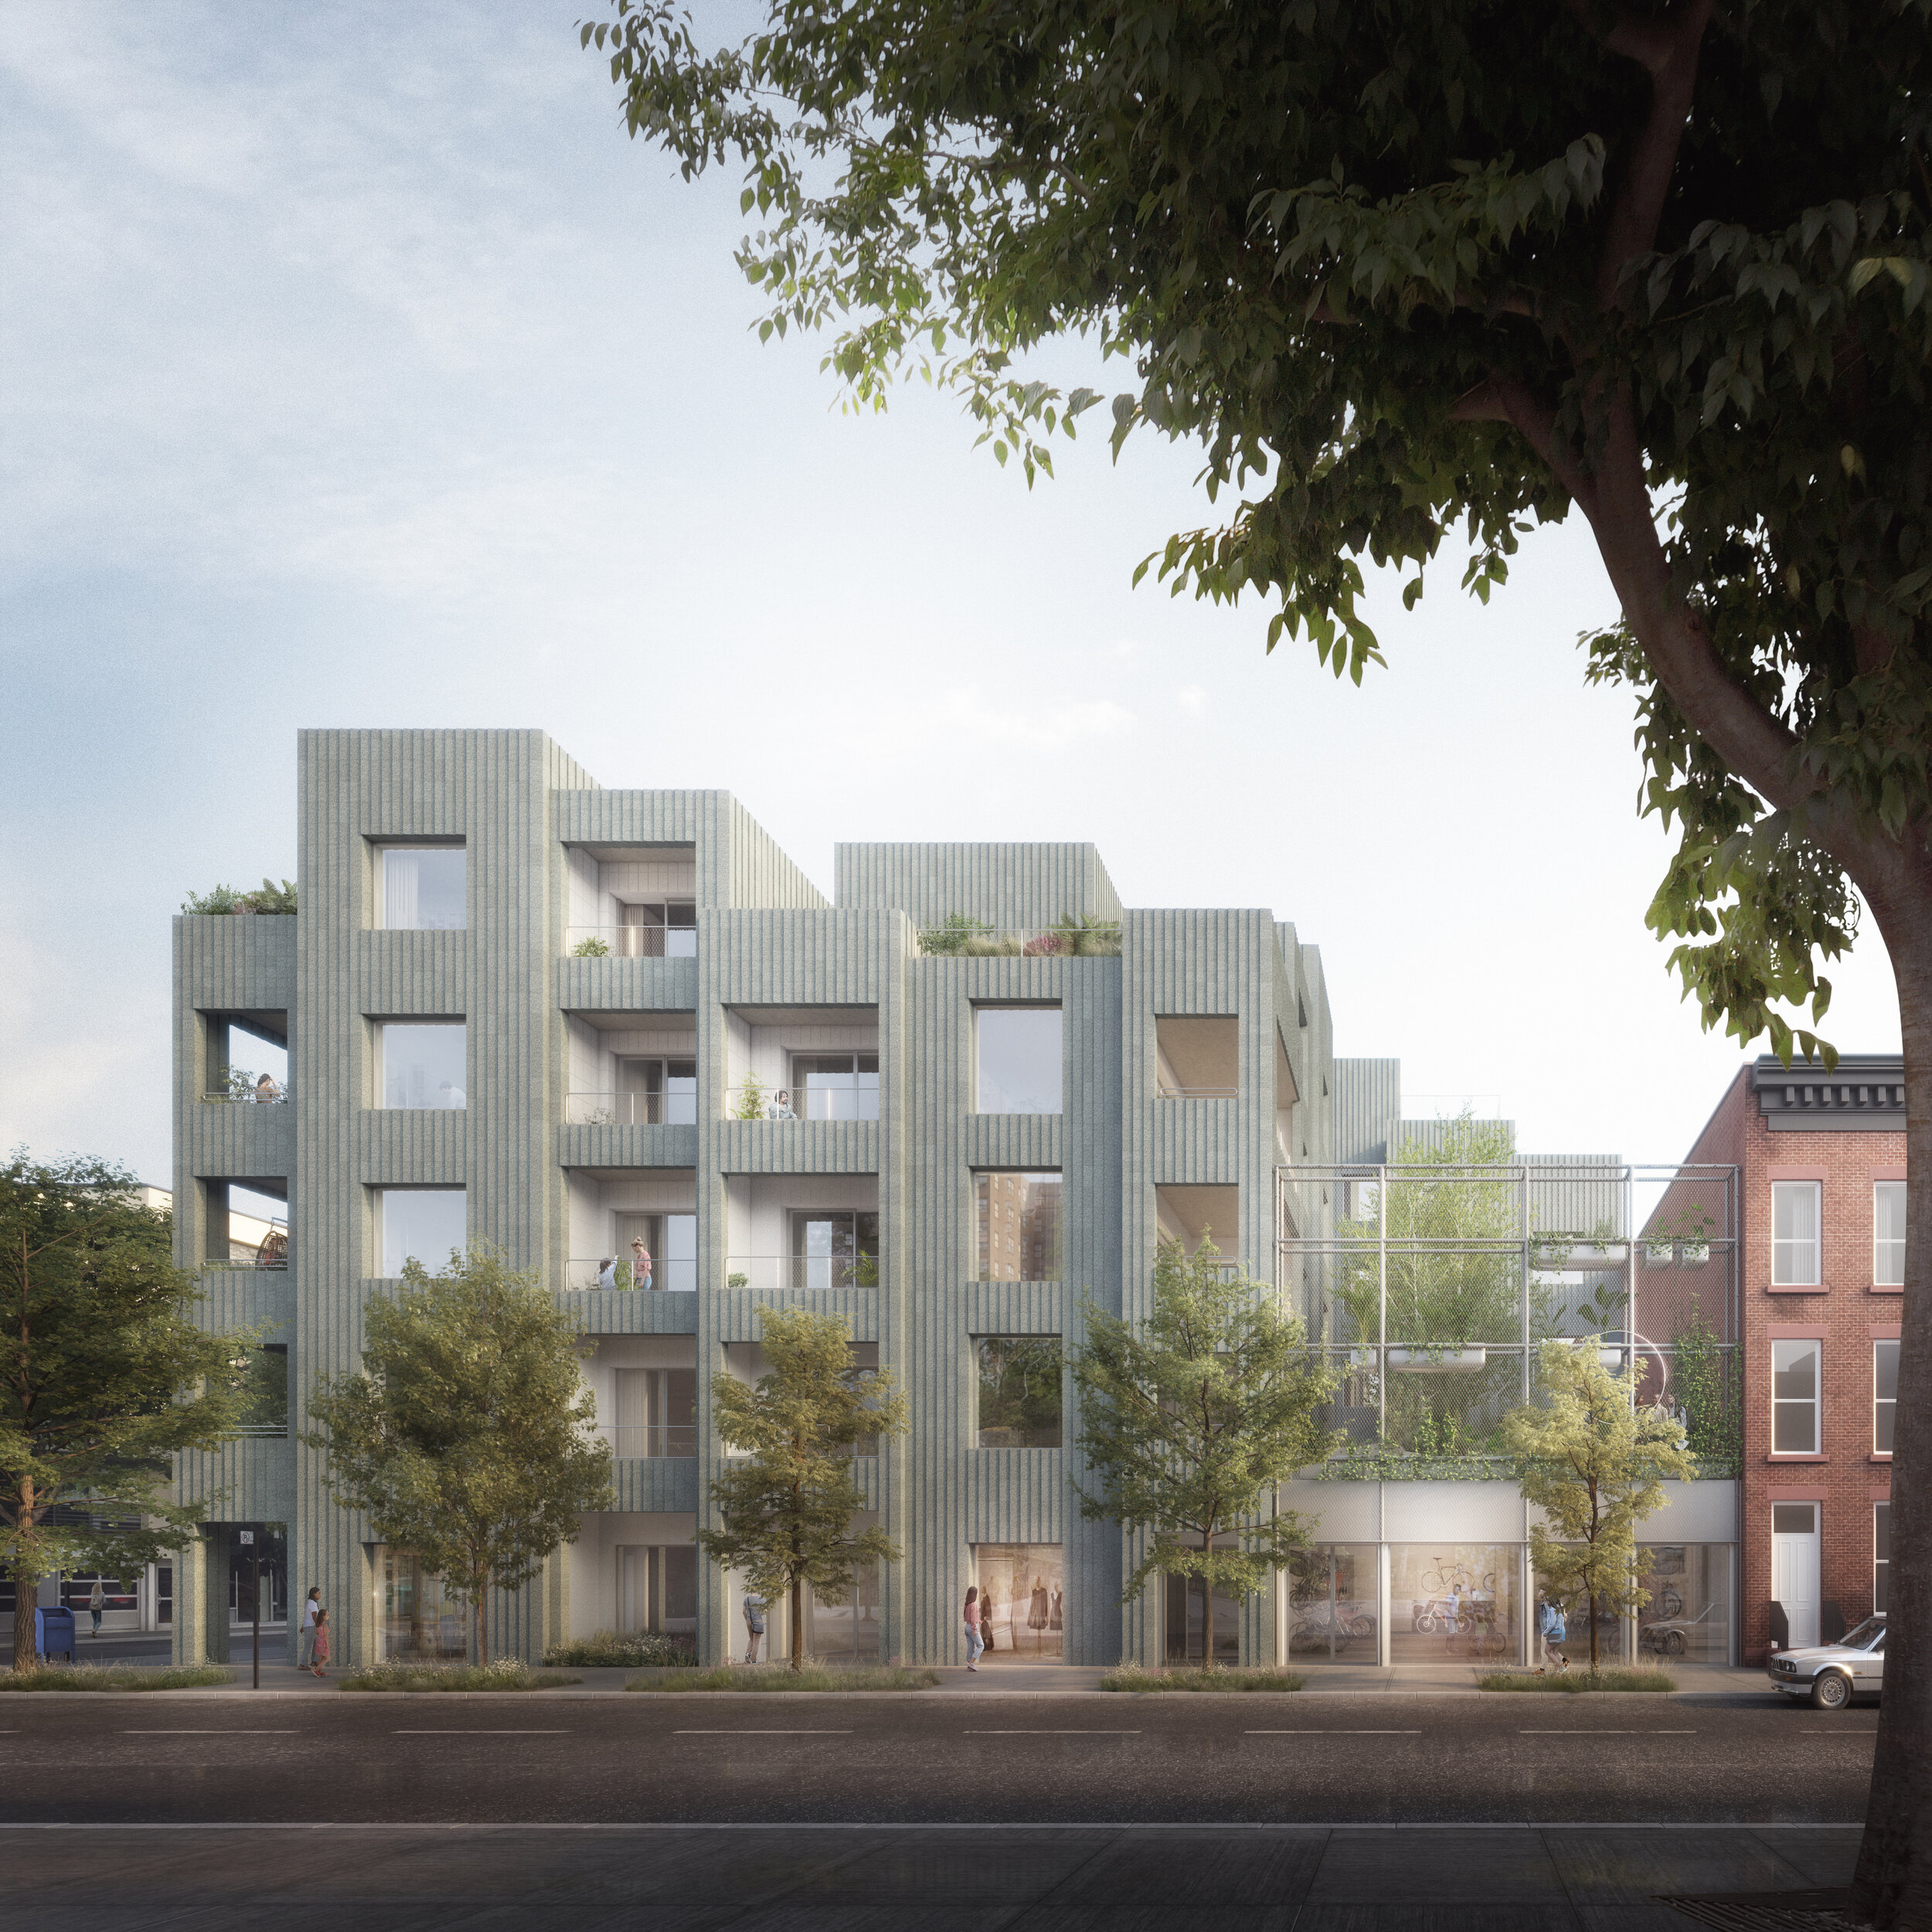  Here is your first look at  450 Warren  in Gowanus, Brooklyn, developed by Brooklyn-based developers  TANKHOUSE  and visionary architects  SO – IL ; it’s a truly unique condominium where residents will experience a novel, (almost experimental,) way 